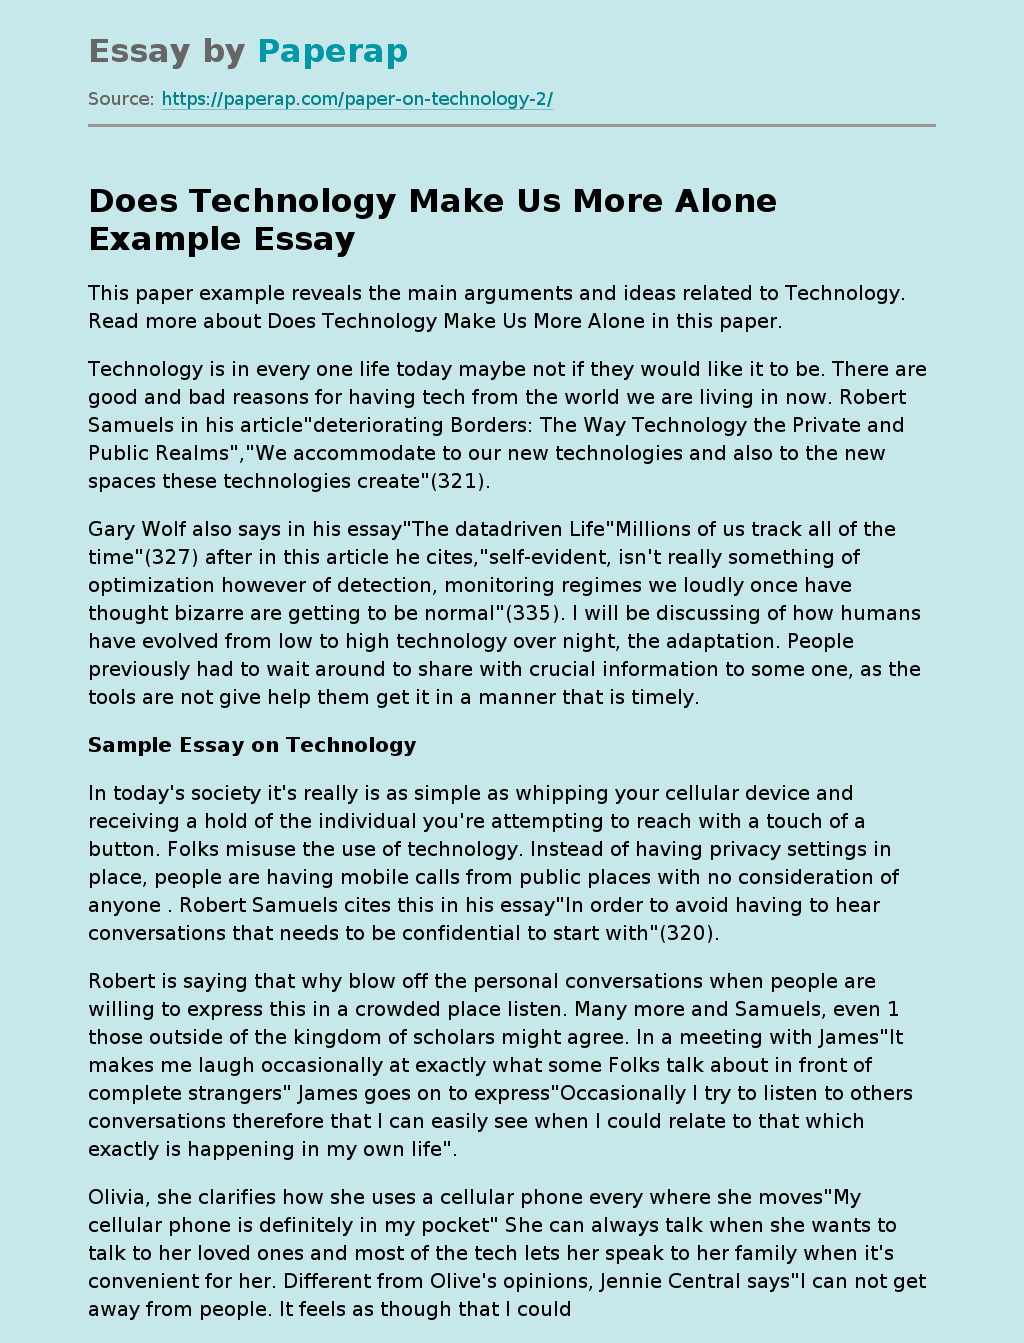 Does Technology Make Us More Alone?